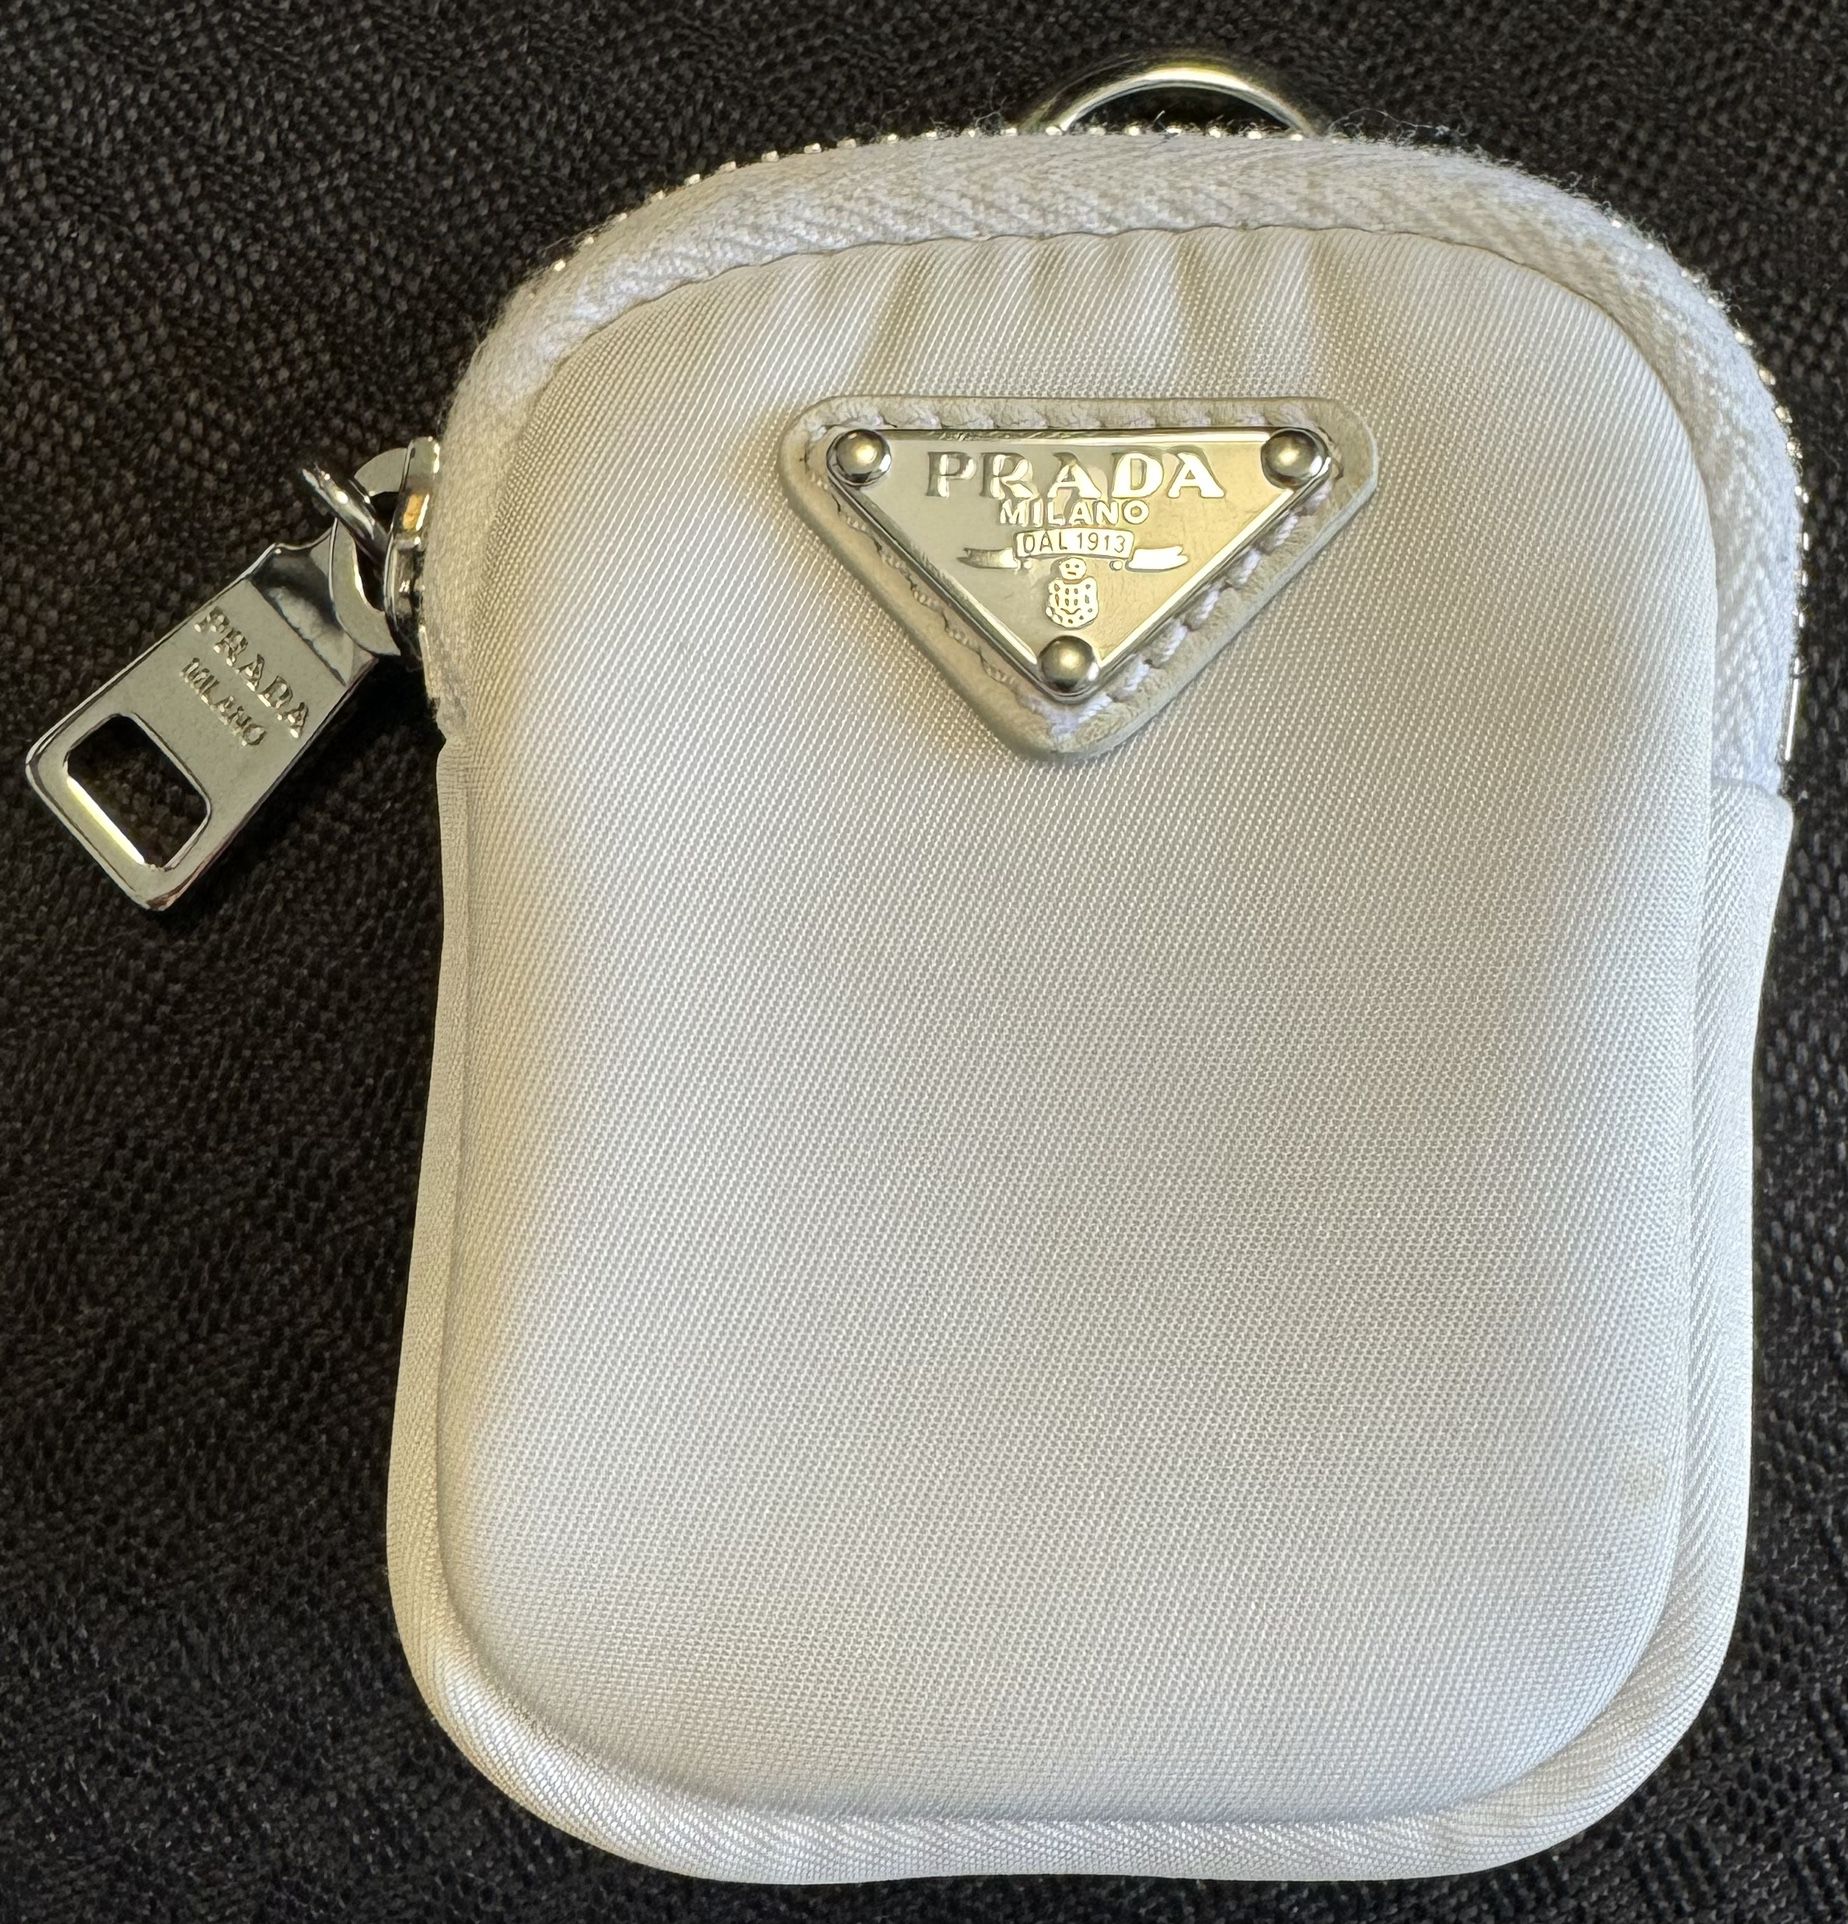 Prada Milano Mini Pouch In Gently Used Condition Retails For $595 New Accepting Reasonable Offers 